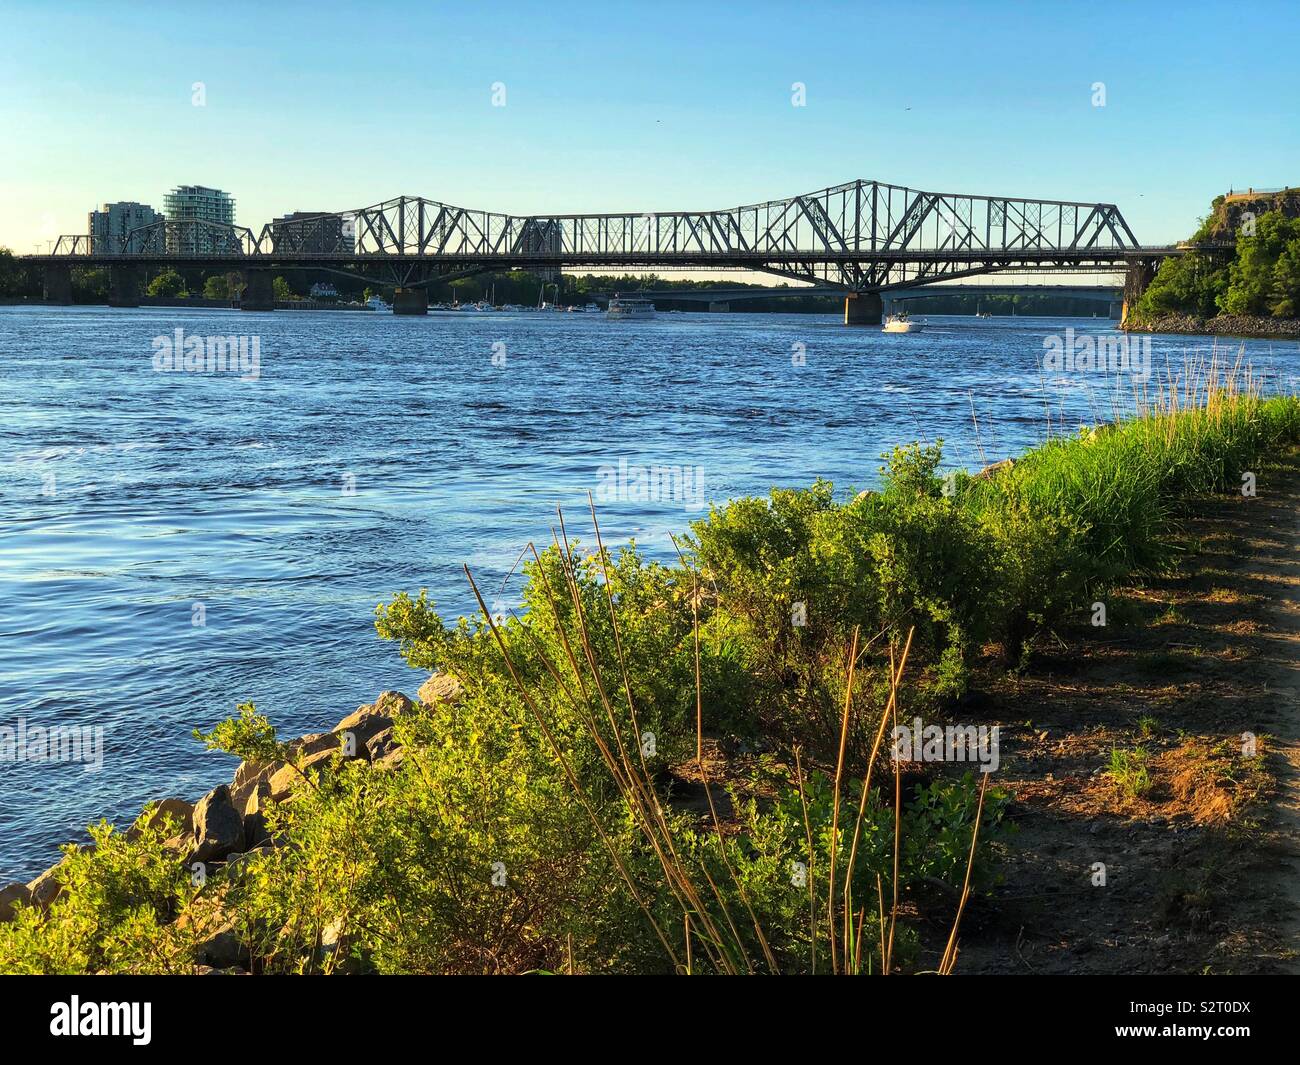 Interprovincial Alexandra Bridge connecting the cities of Ottawa, Ontario  and Gatineau, Quebec in Canada open for traffic in 1901, may be replaced  within 10 years due to rising cost of repairs, 2019